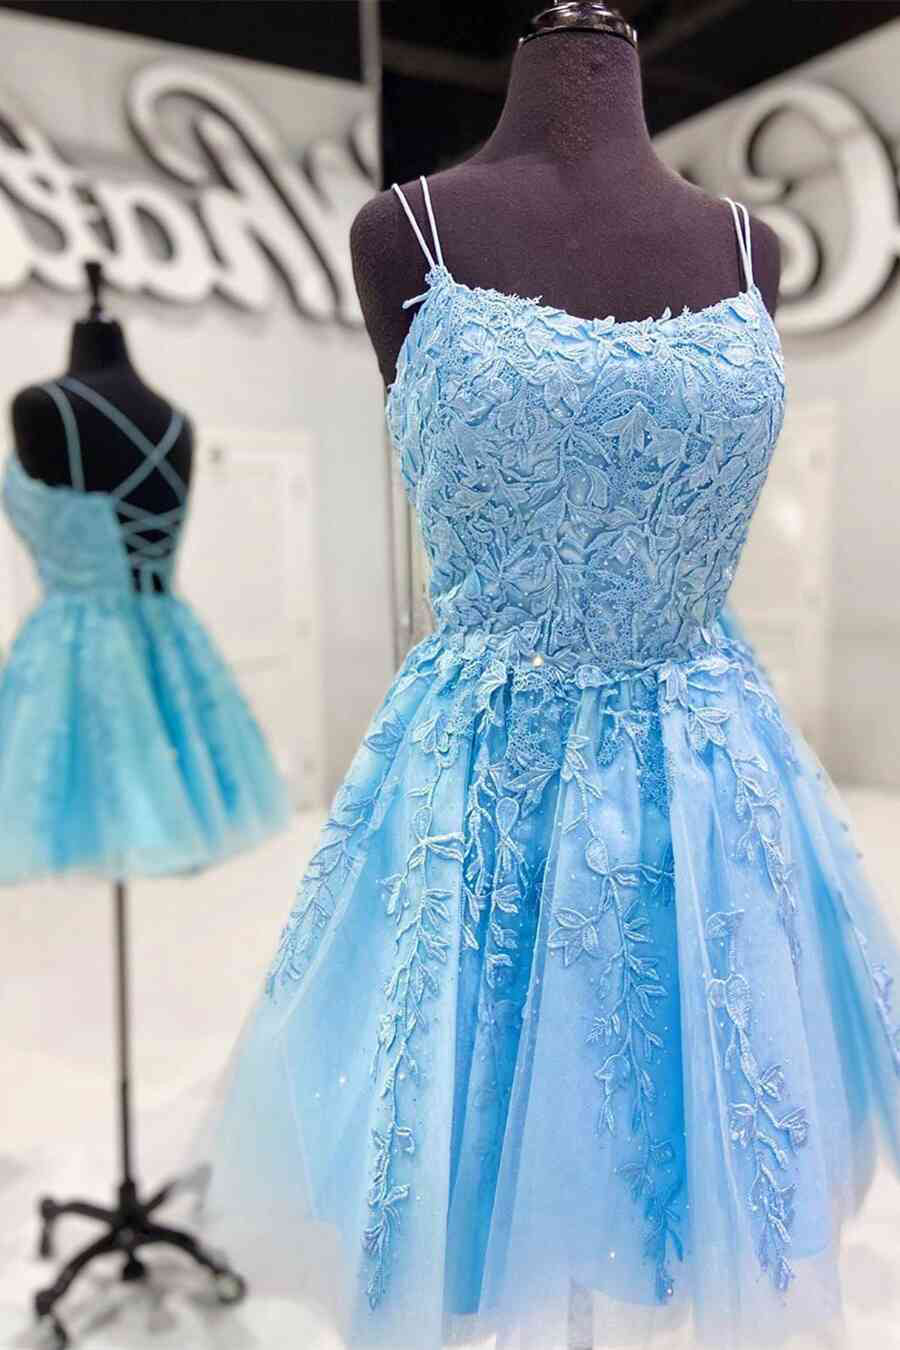 Party Dress Lady, Blue A-line Spaghetti Straps Lace Short Prom Dresses, Homecoming Dresses